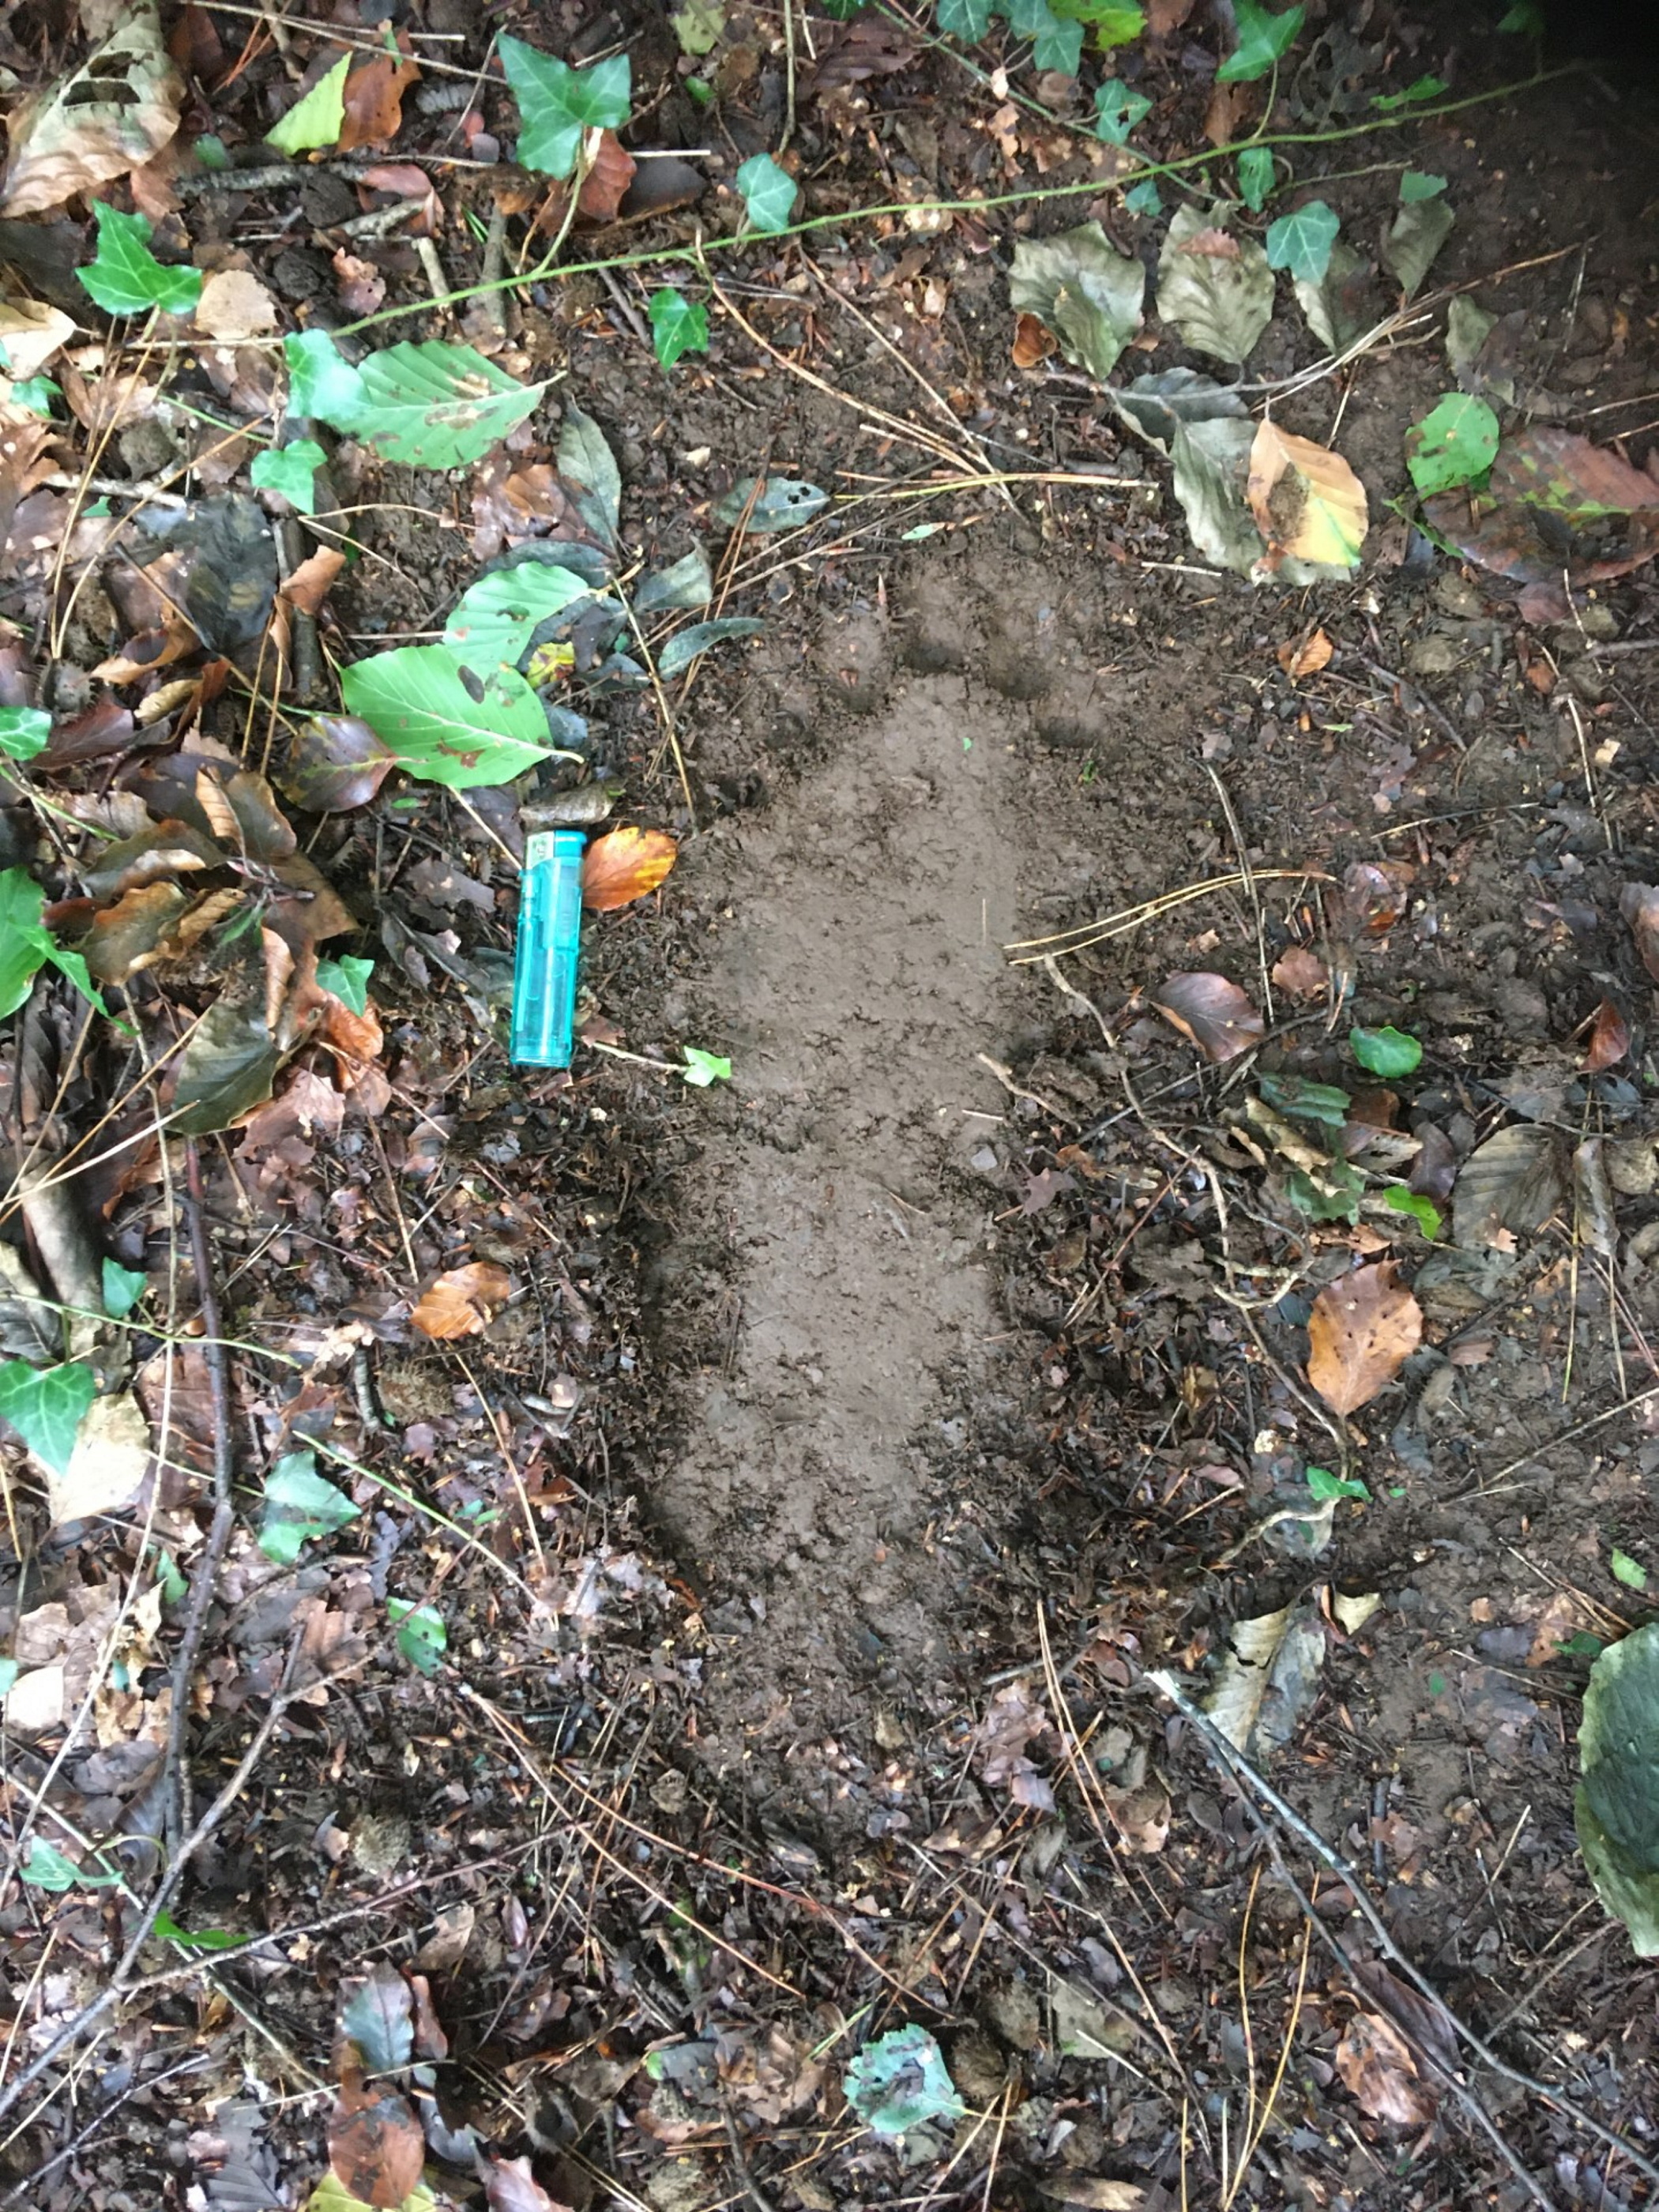 Large footprints that have been discovered in a remote woodland could belong to Bigfoot, paranormal experts claim. Image: SWNS